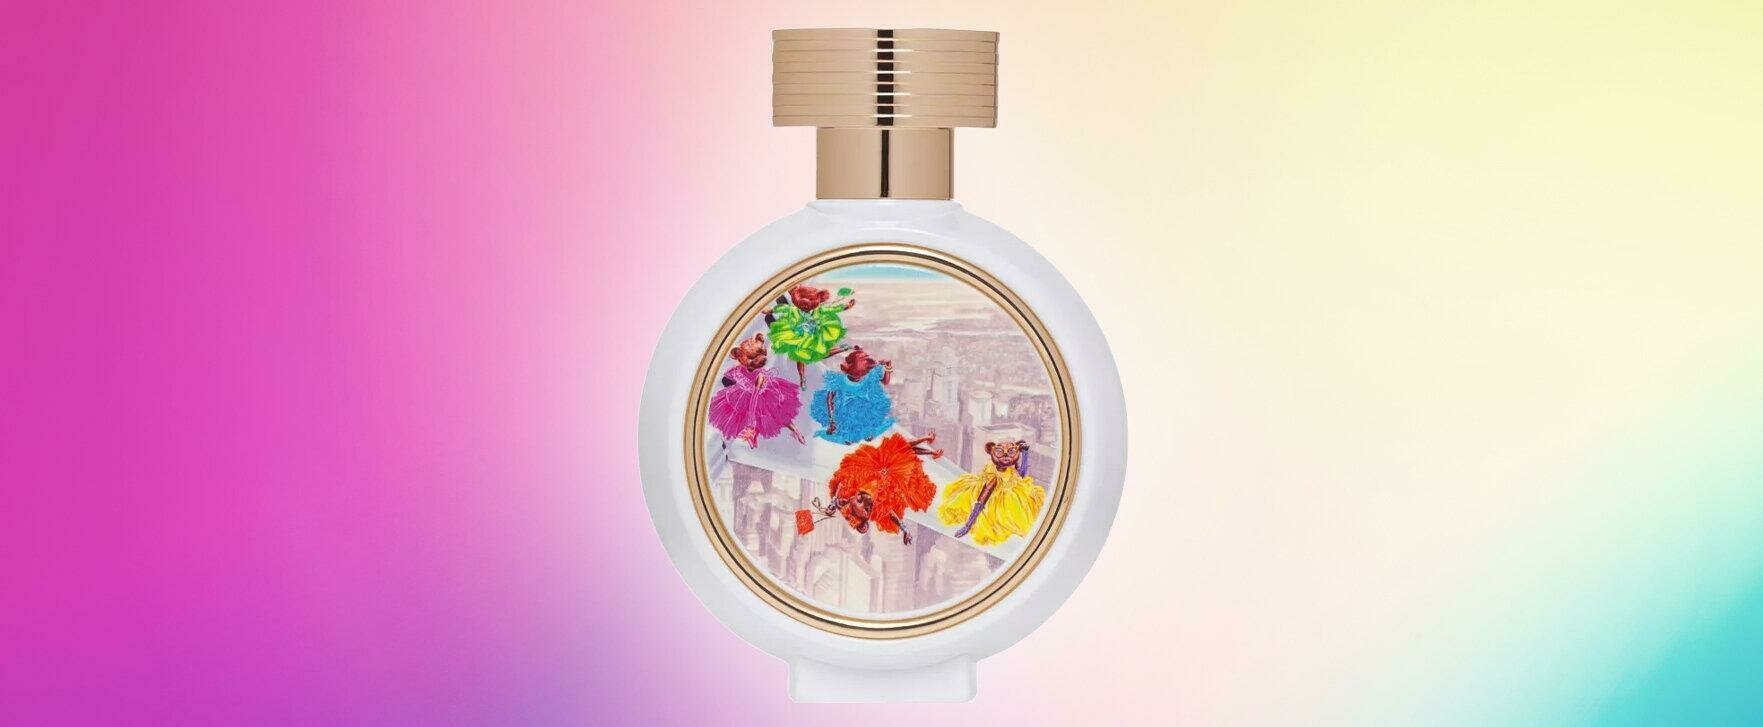 The Magic of Childhood: Haute Fragrance Company Presents the Oriental Fragrance "Fly to Miracle"